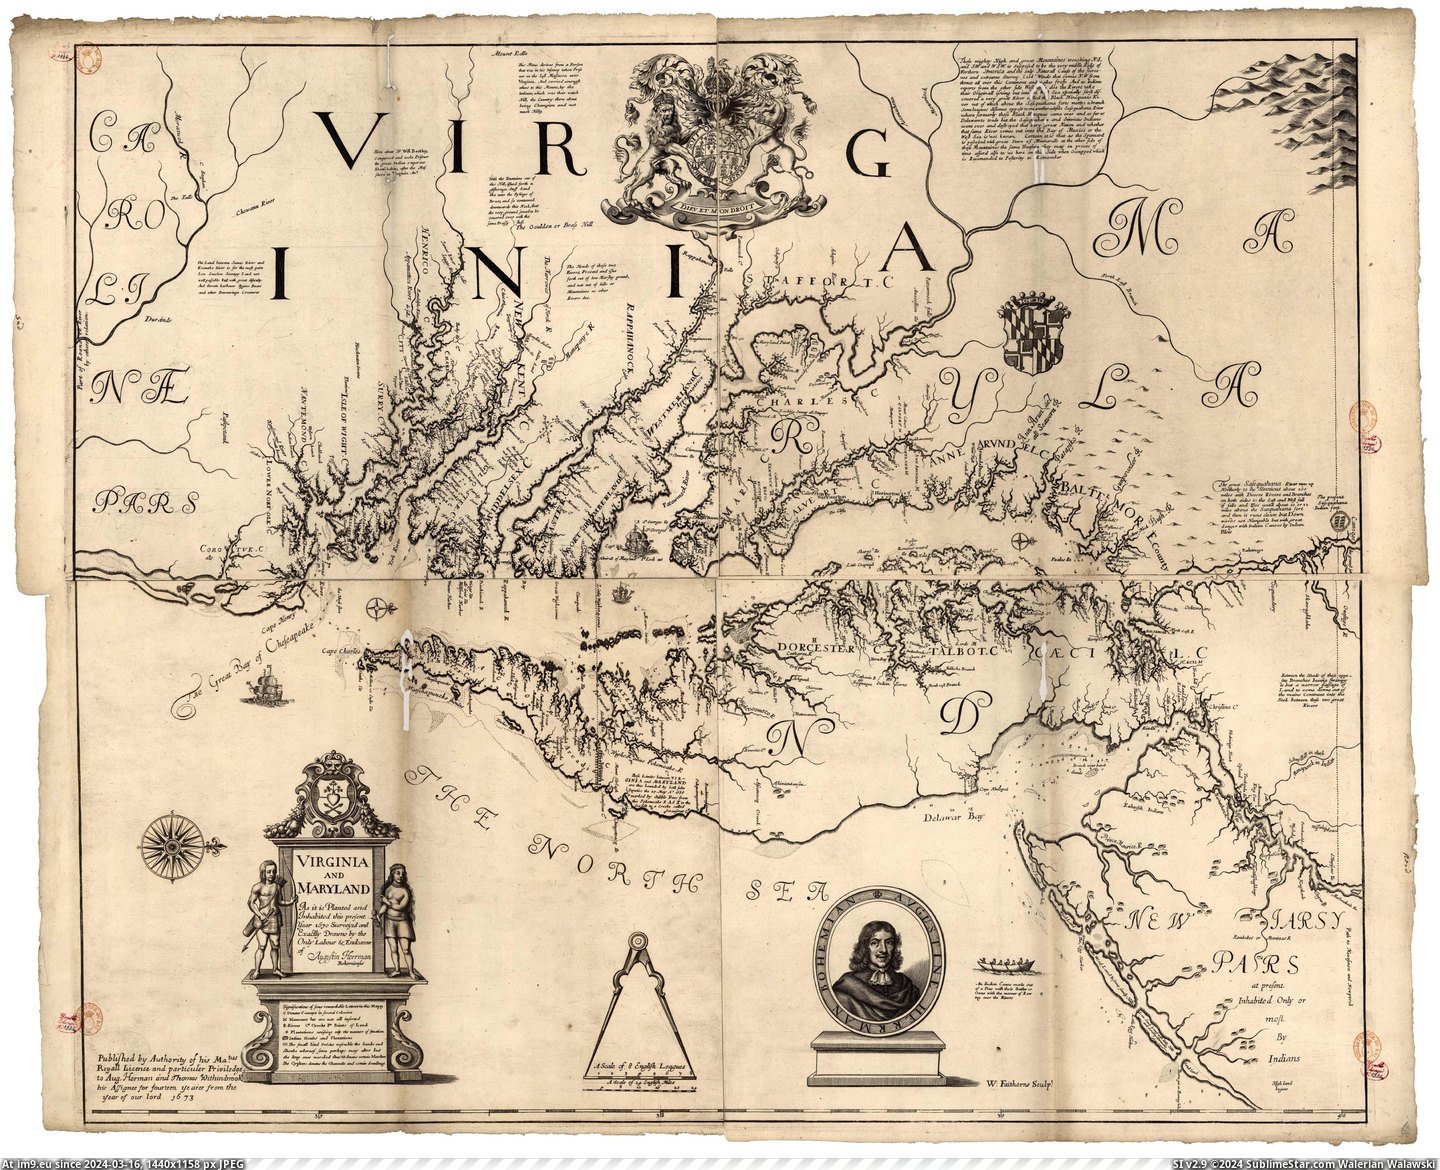 #Virginia #Maryland #Herman #Published #Augustine [Mapporn] Maryland & Virginia c. 1670 (published 1673) by Augustine Herman [5000x4034] Pic. (Image of album My r/MAPS favs))